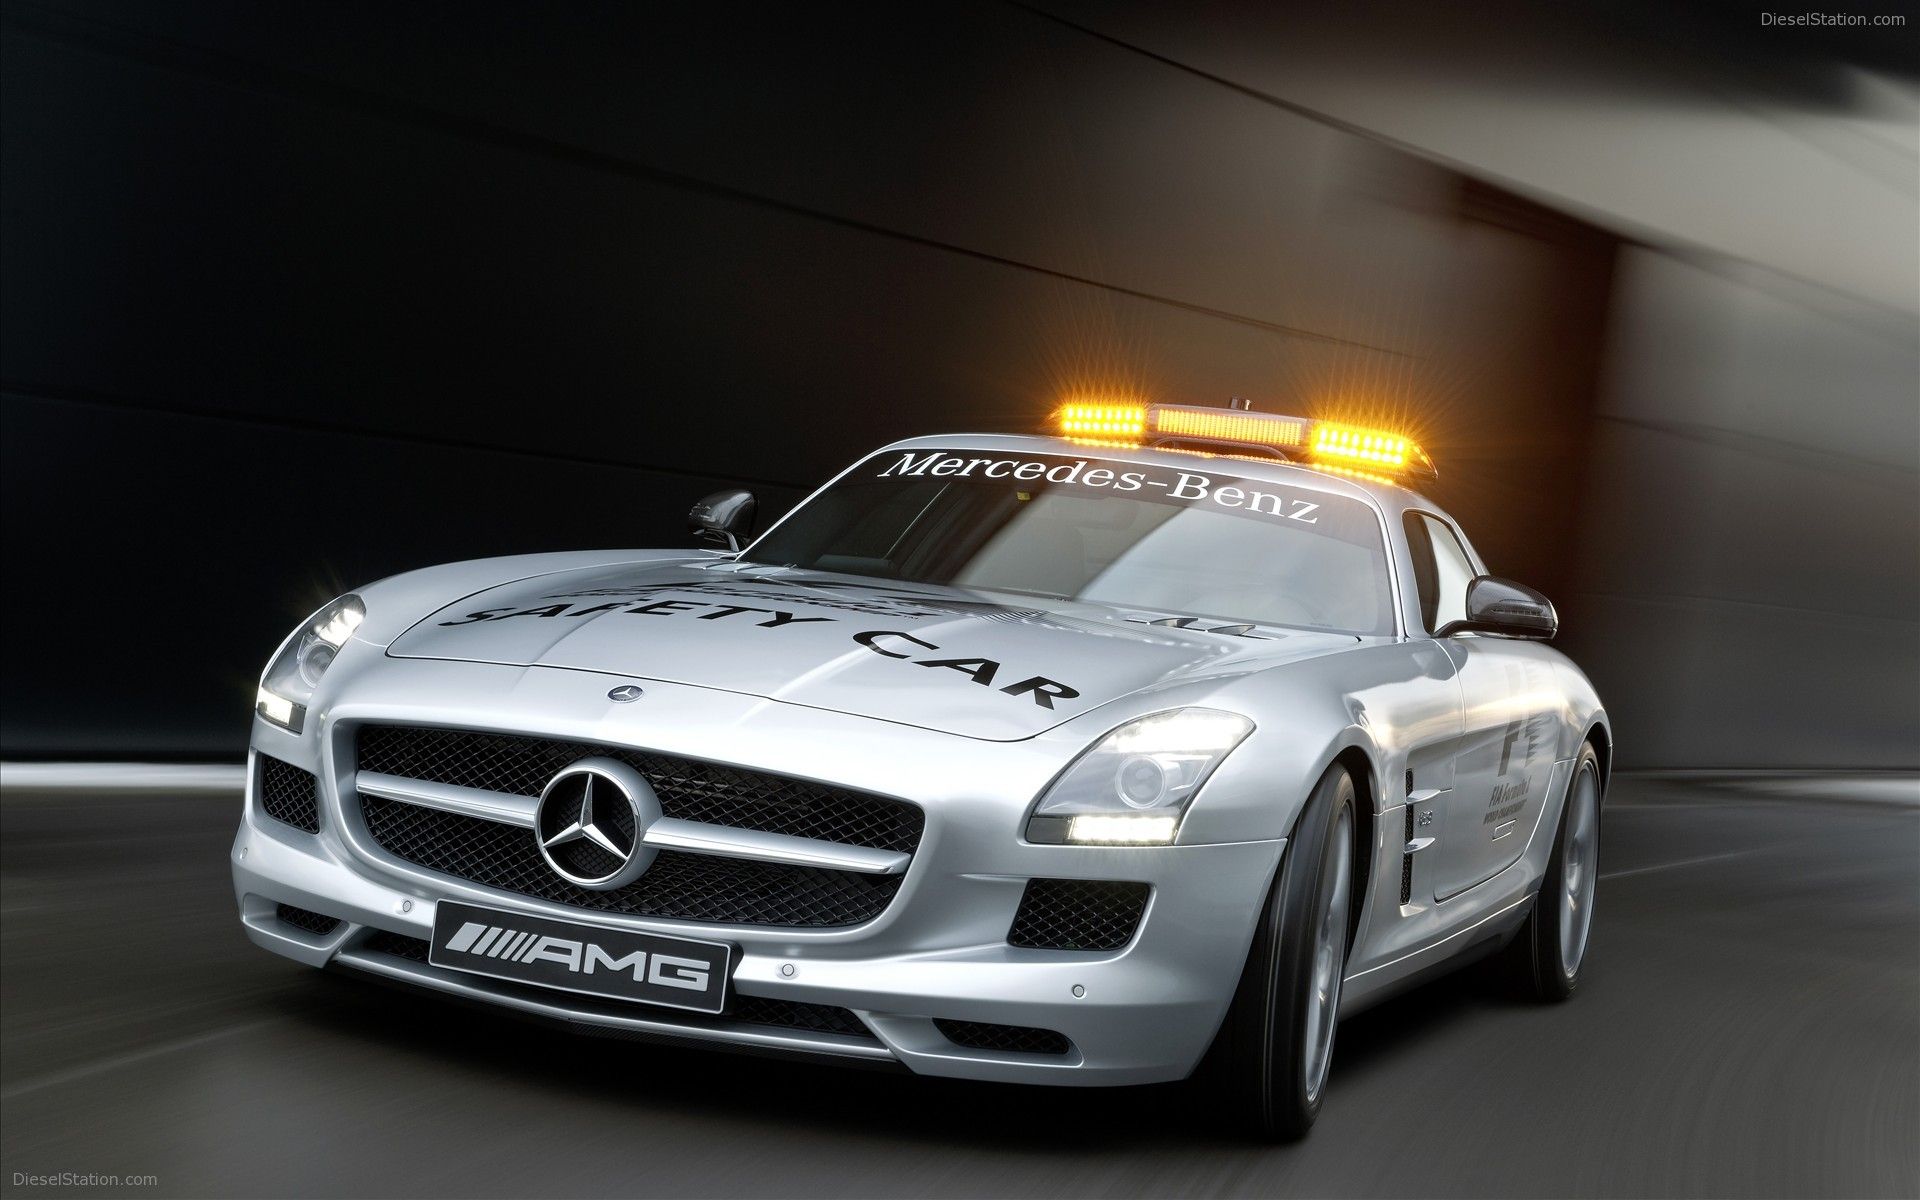 Mercedes Benz SLS AMG F1 Safety Car 2010 Widescreen Exotic Car Wallpaper Of 28, Diesel Station